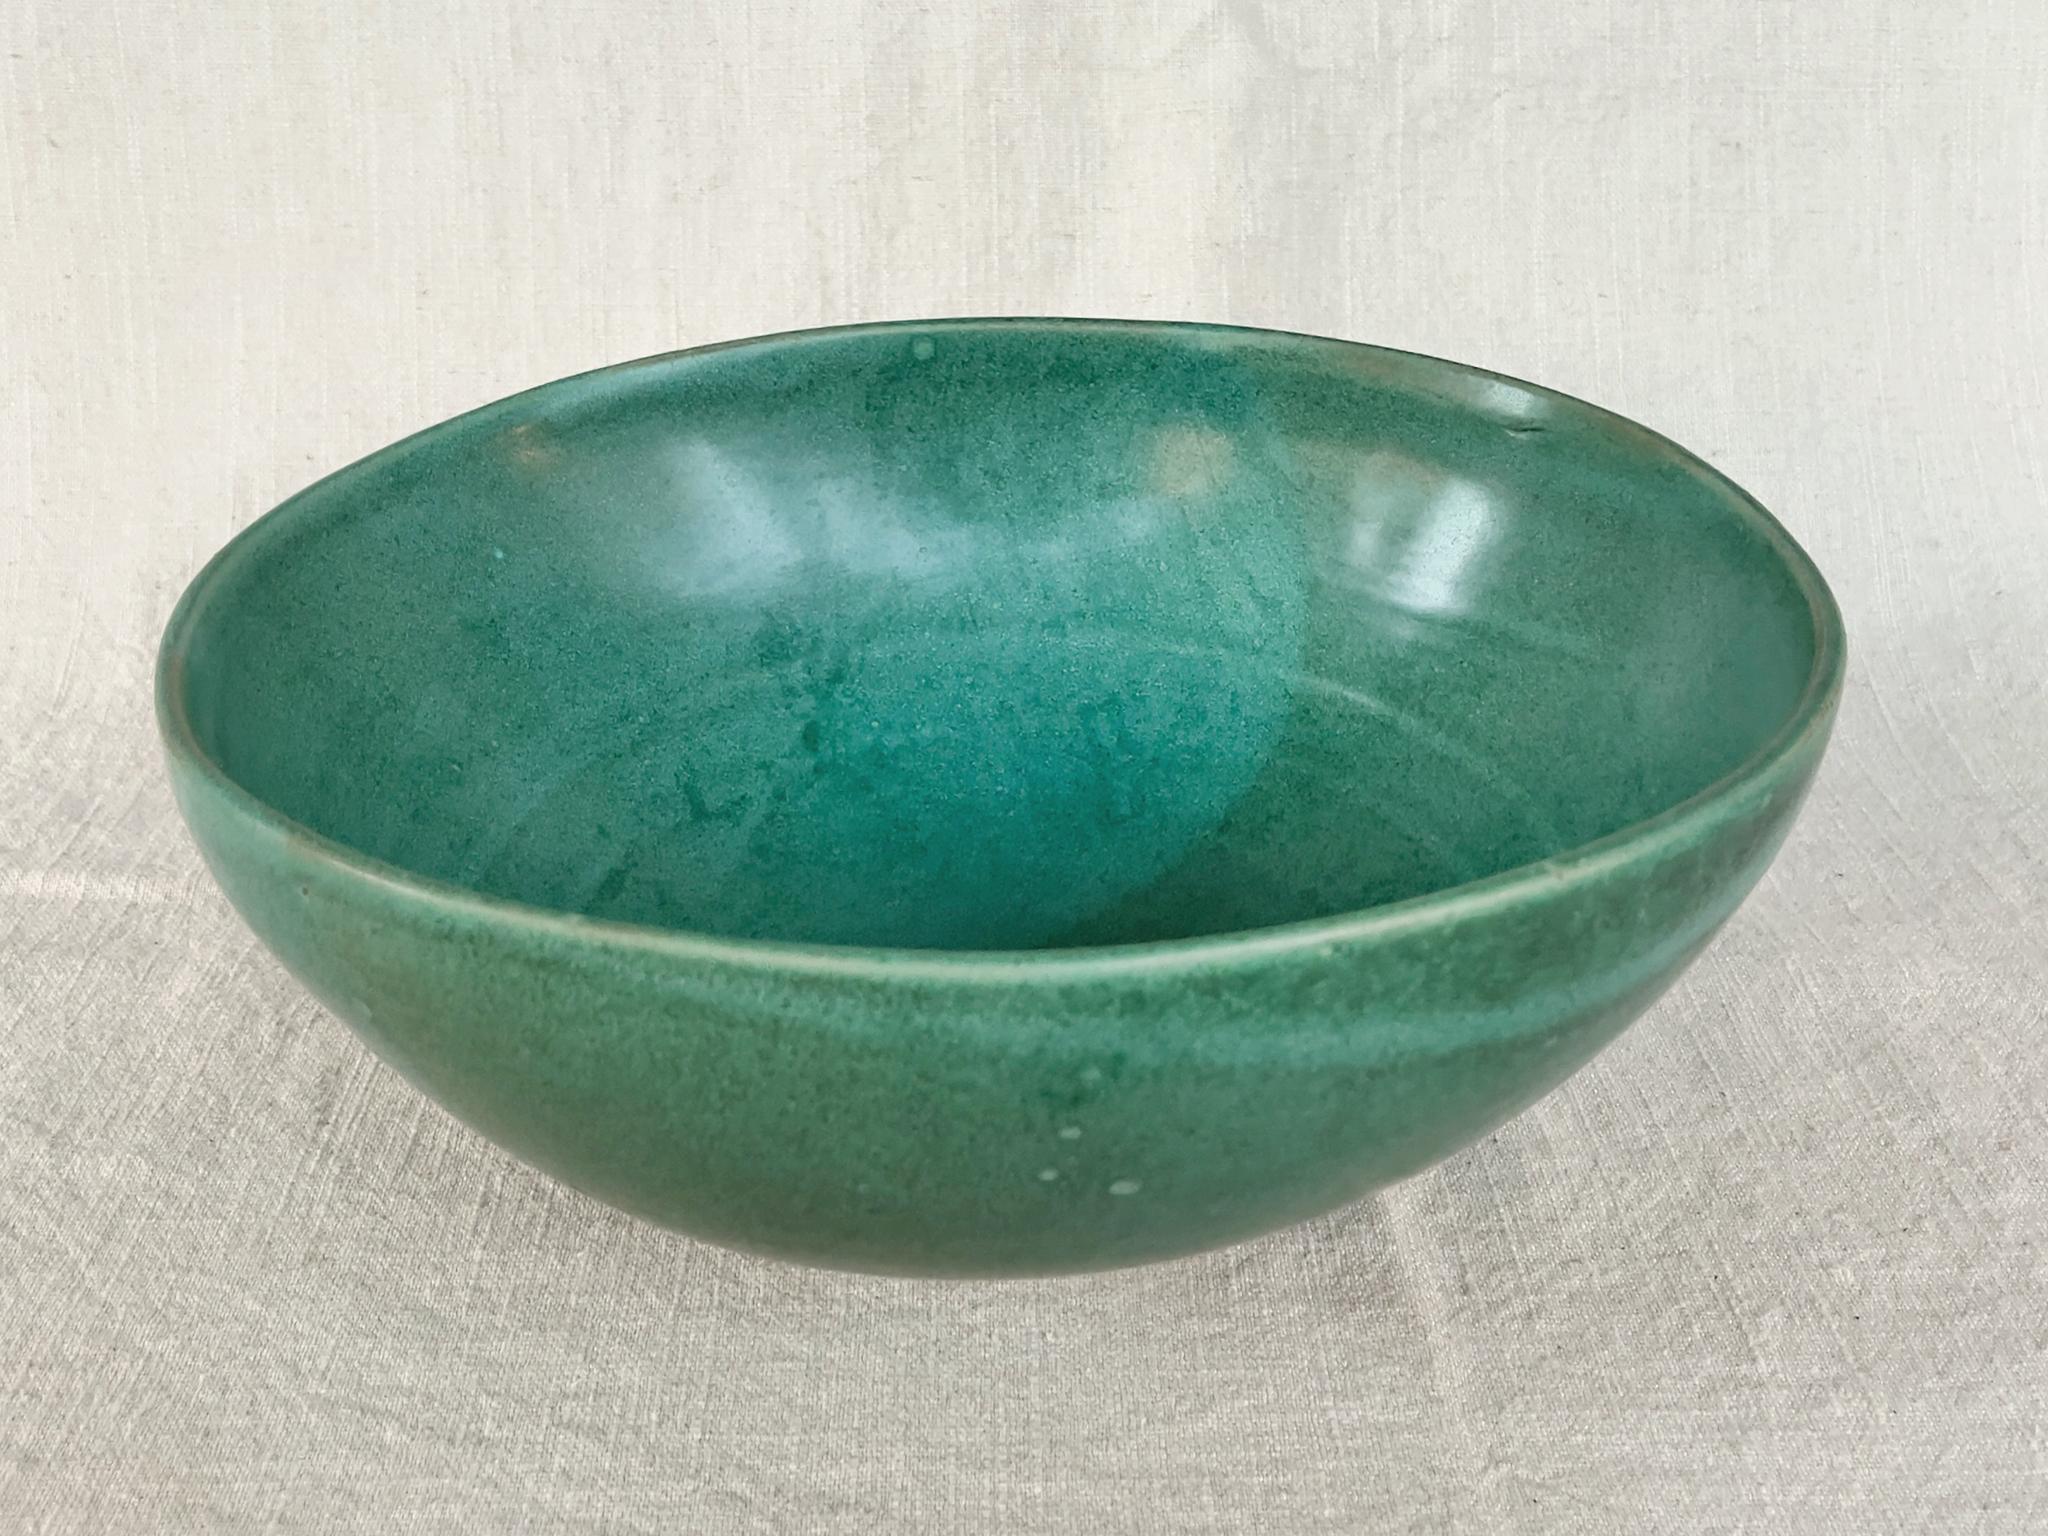 From Thom Lussier's Oxidized Copper Collection - a series of ceramic vessels that stand out for their brilliant palette and rich textures. This bowl is safe for food.

White stoneware with Cone 6 glaze.

Dimensions:
10.5 in. width
11.5 in.